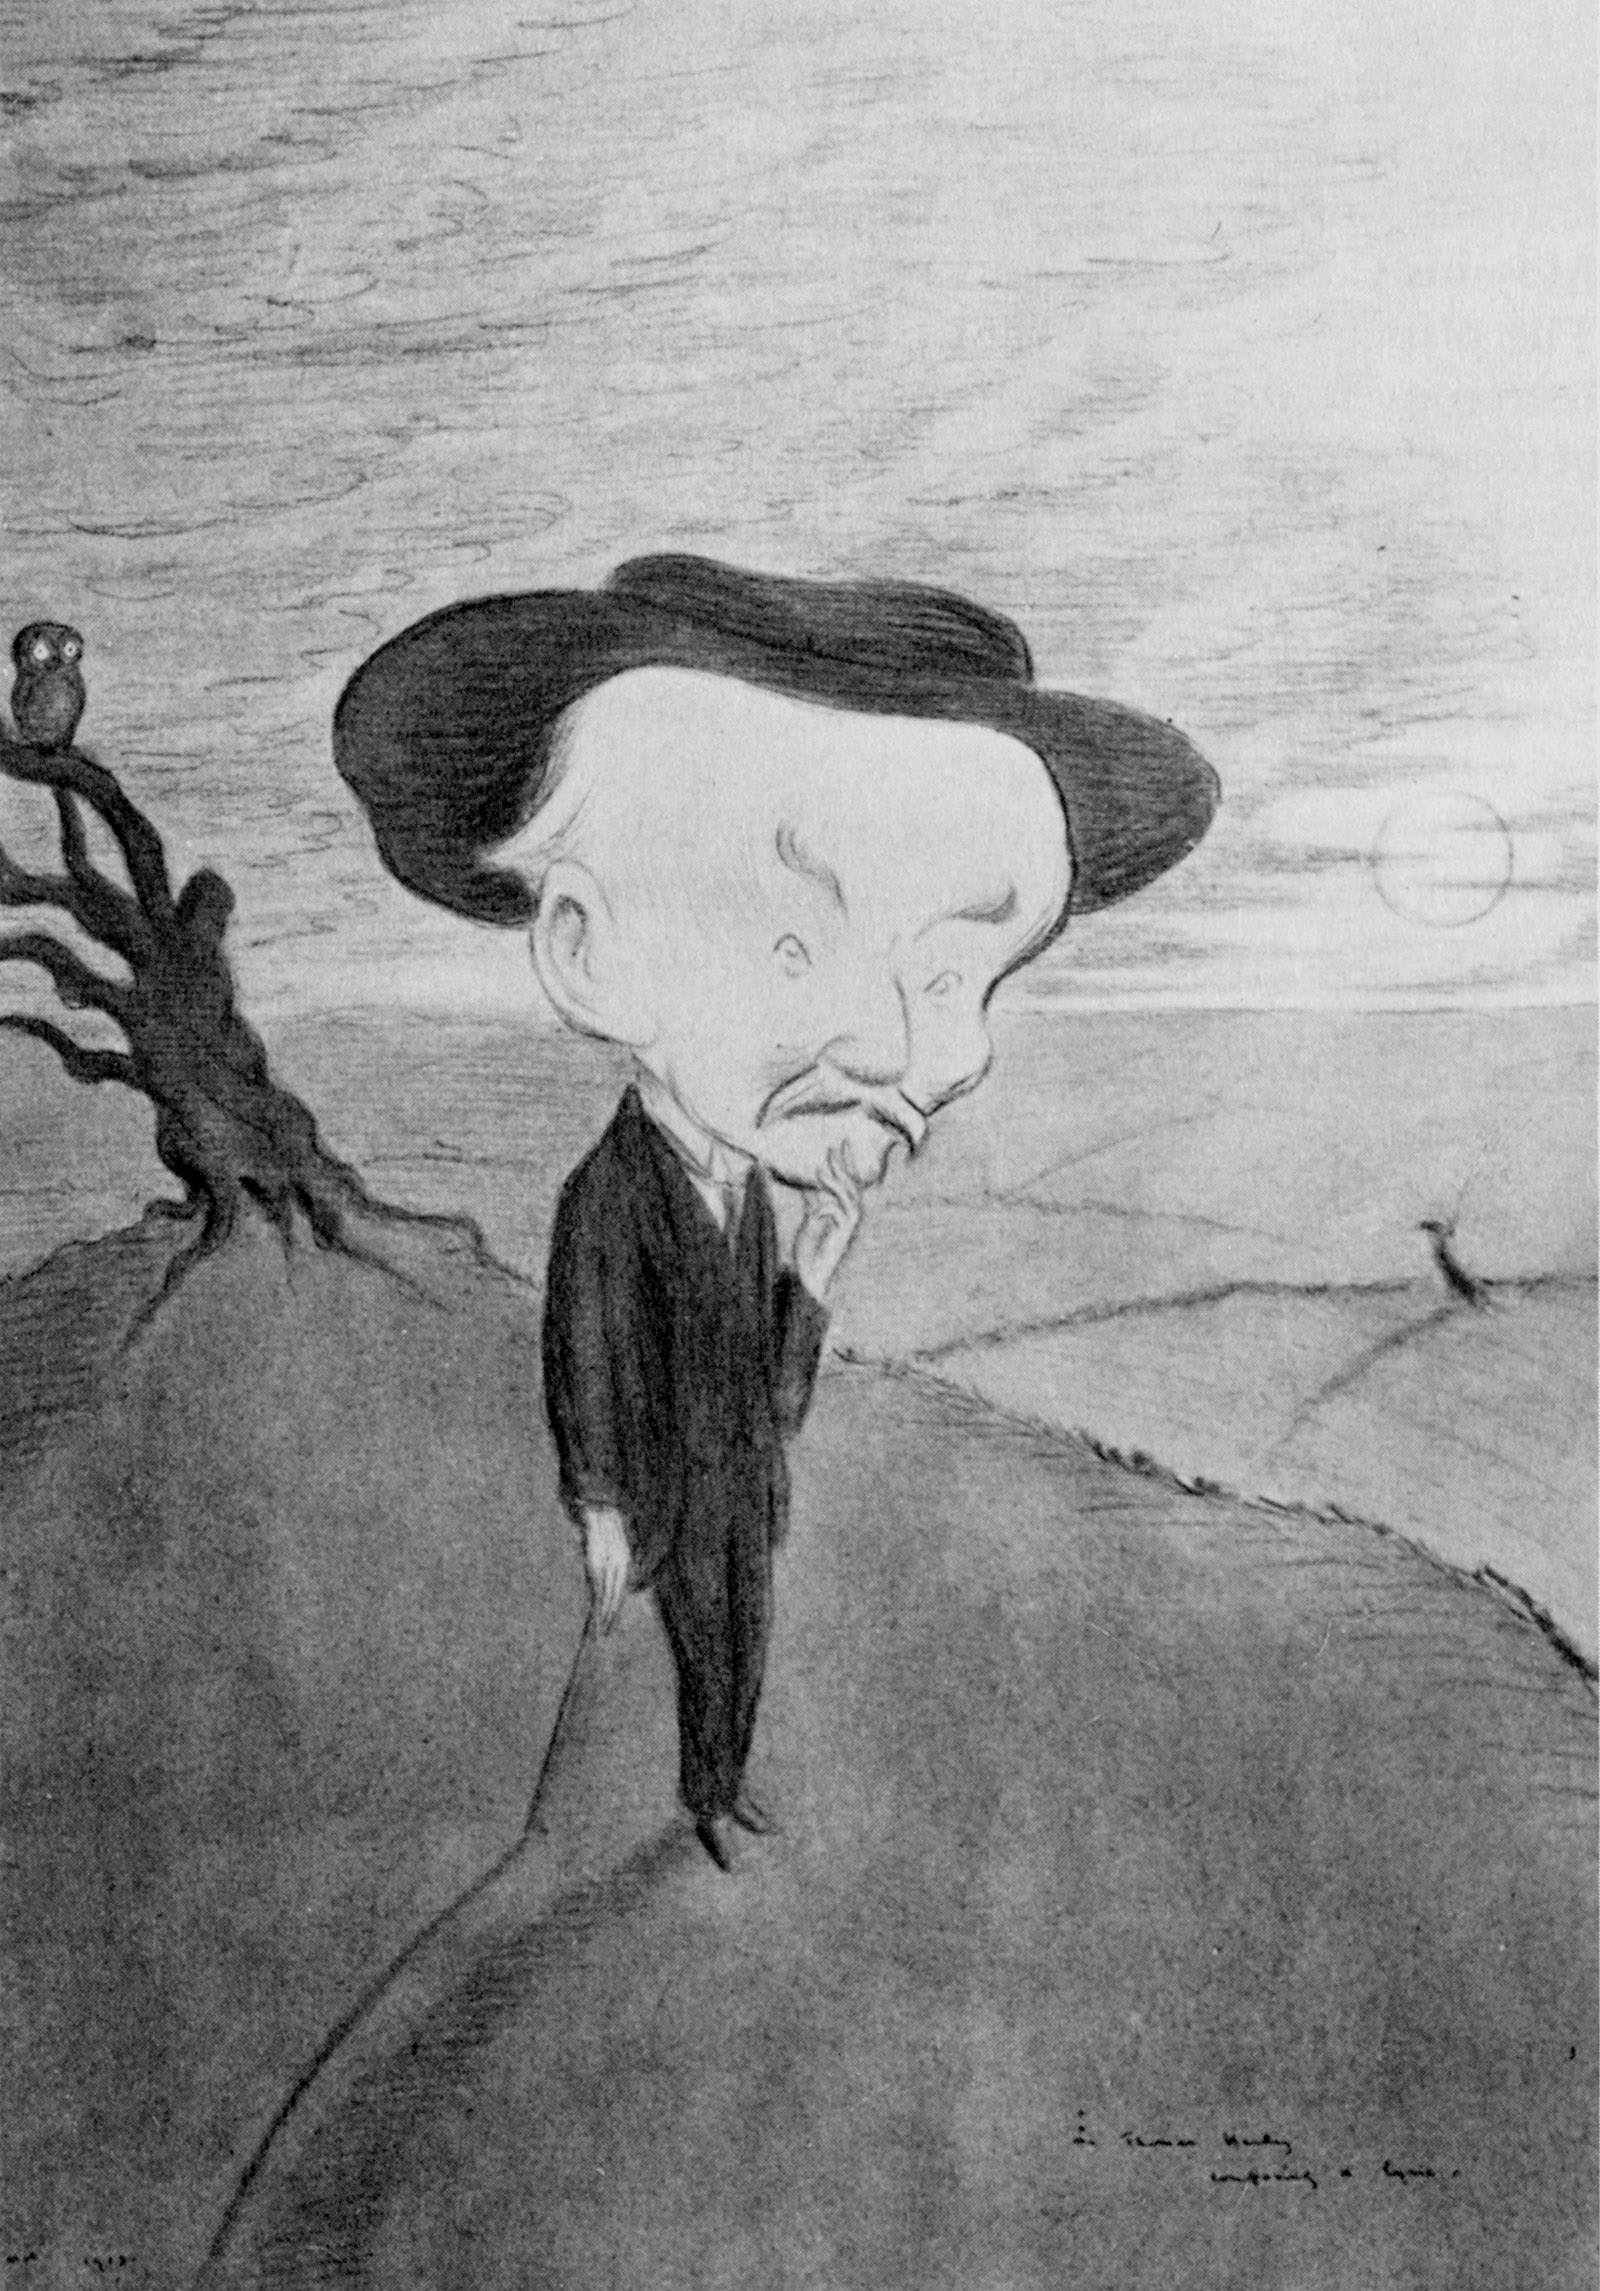 ‘Mr. Thomas Hardy composing a lyric’; drawing by Max Beerbohm, 1913